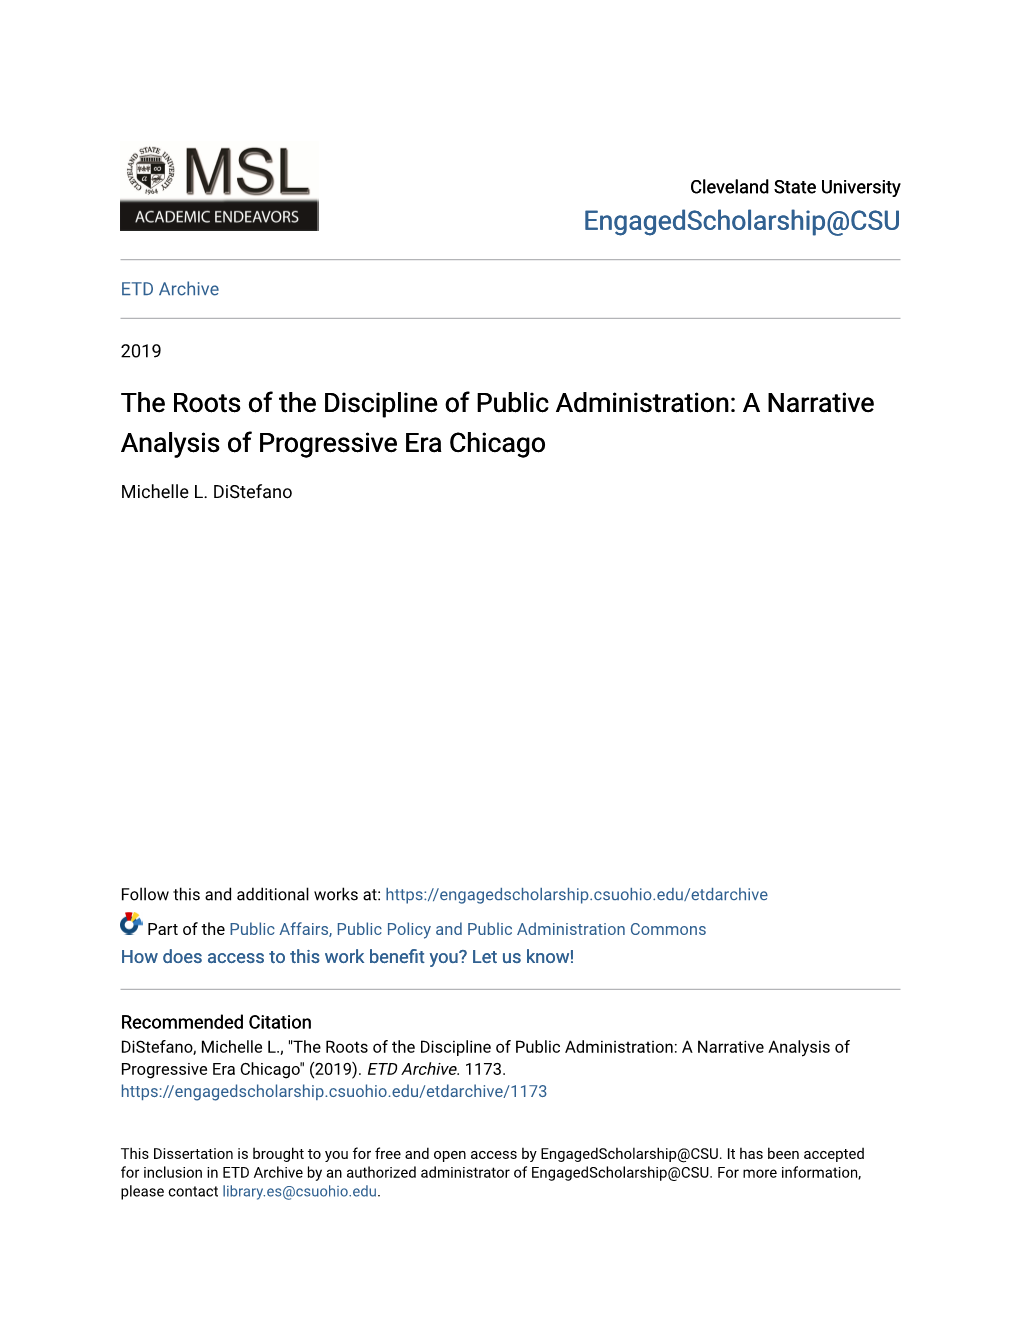 The Roots of the Discipline of Public Administration: a Narrative Analysis of Progressive Era Chicago